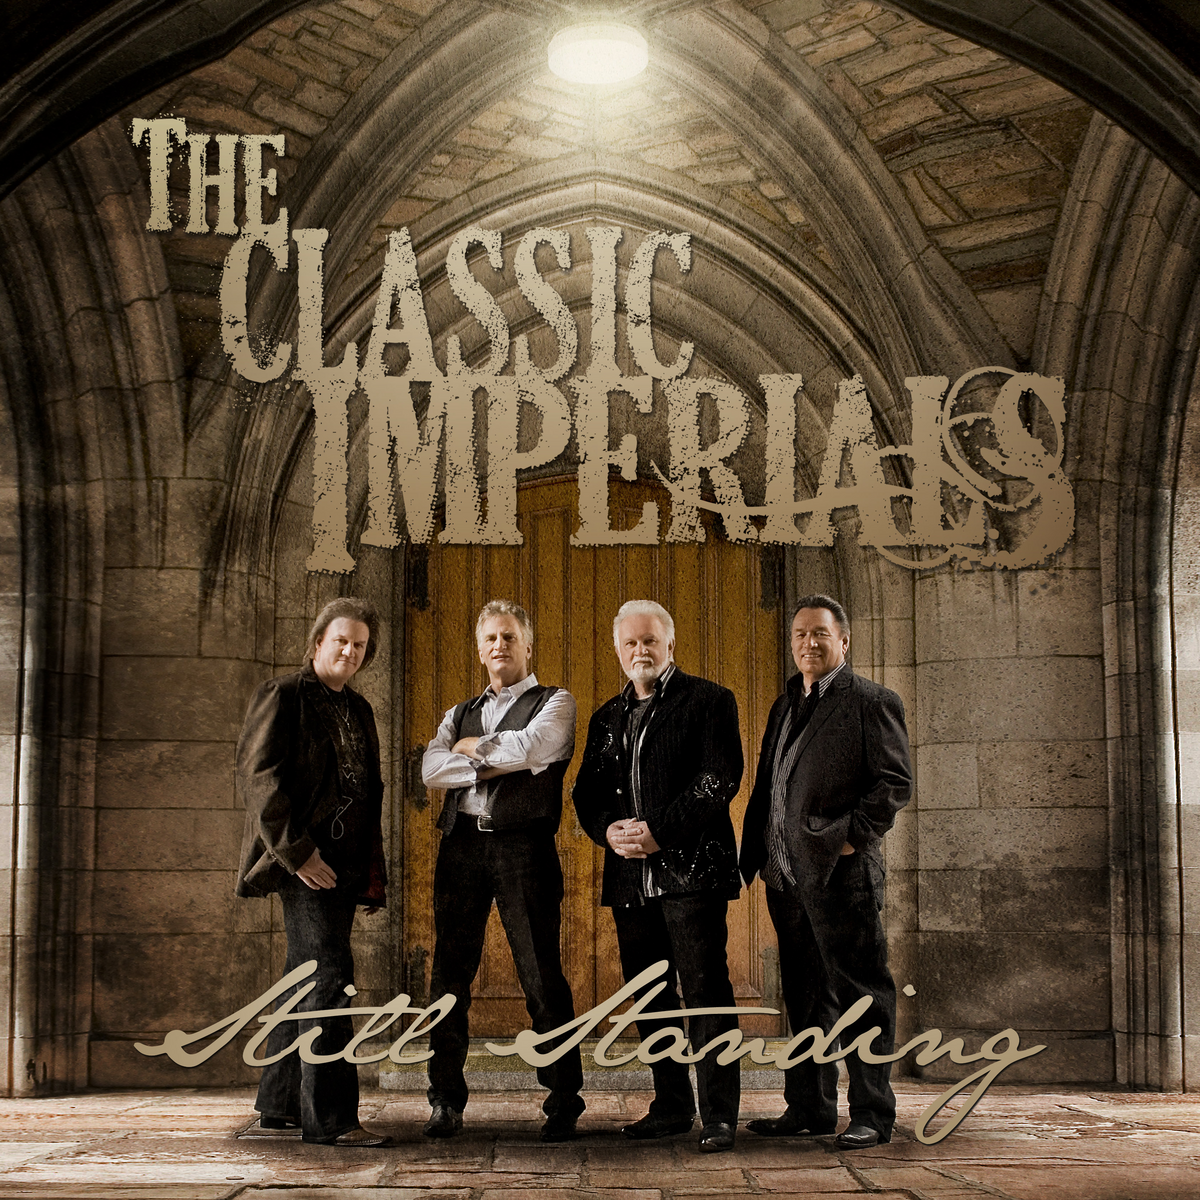 The Imperials - Christmas with the Imperials